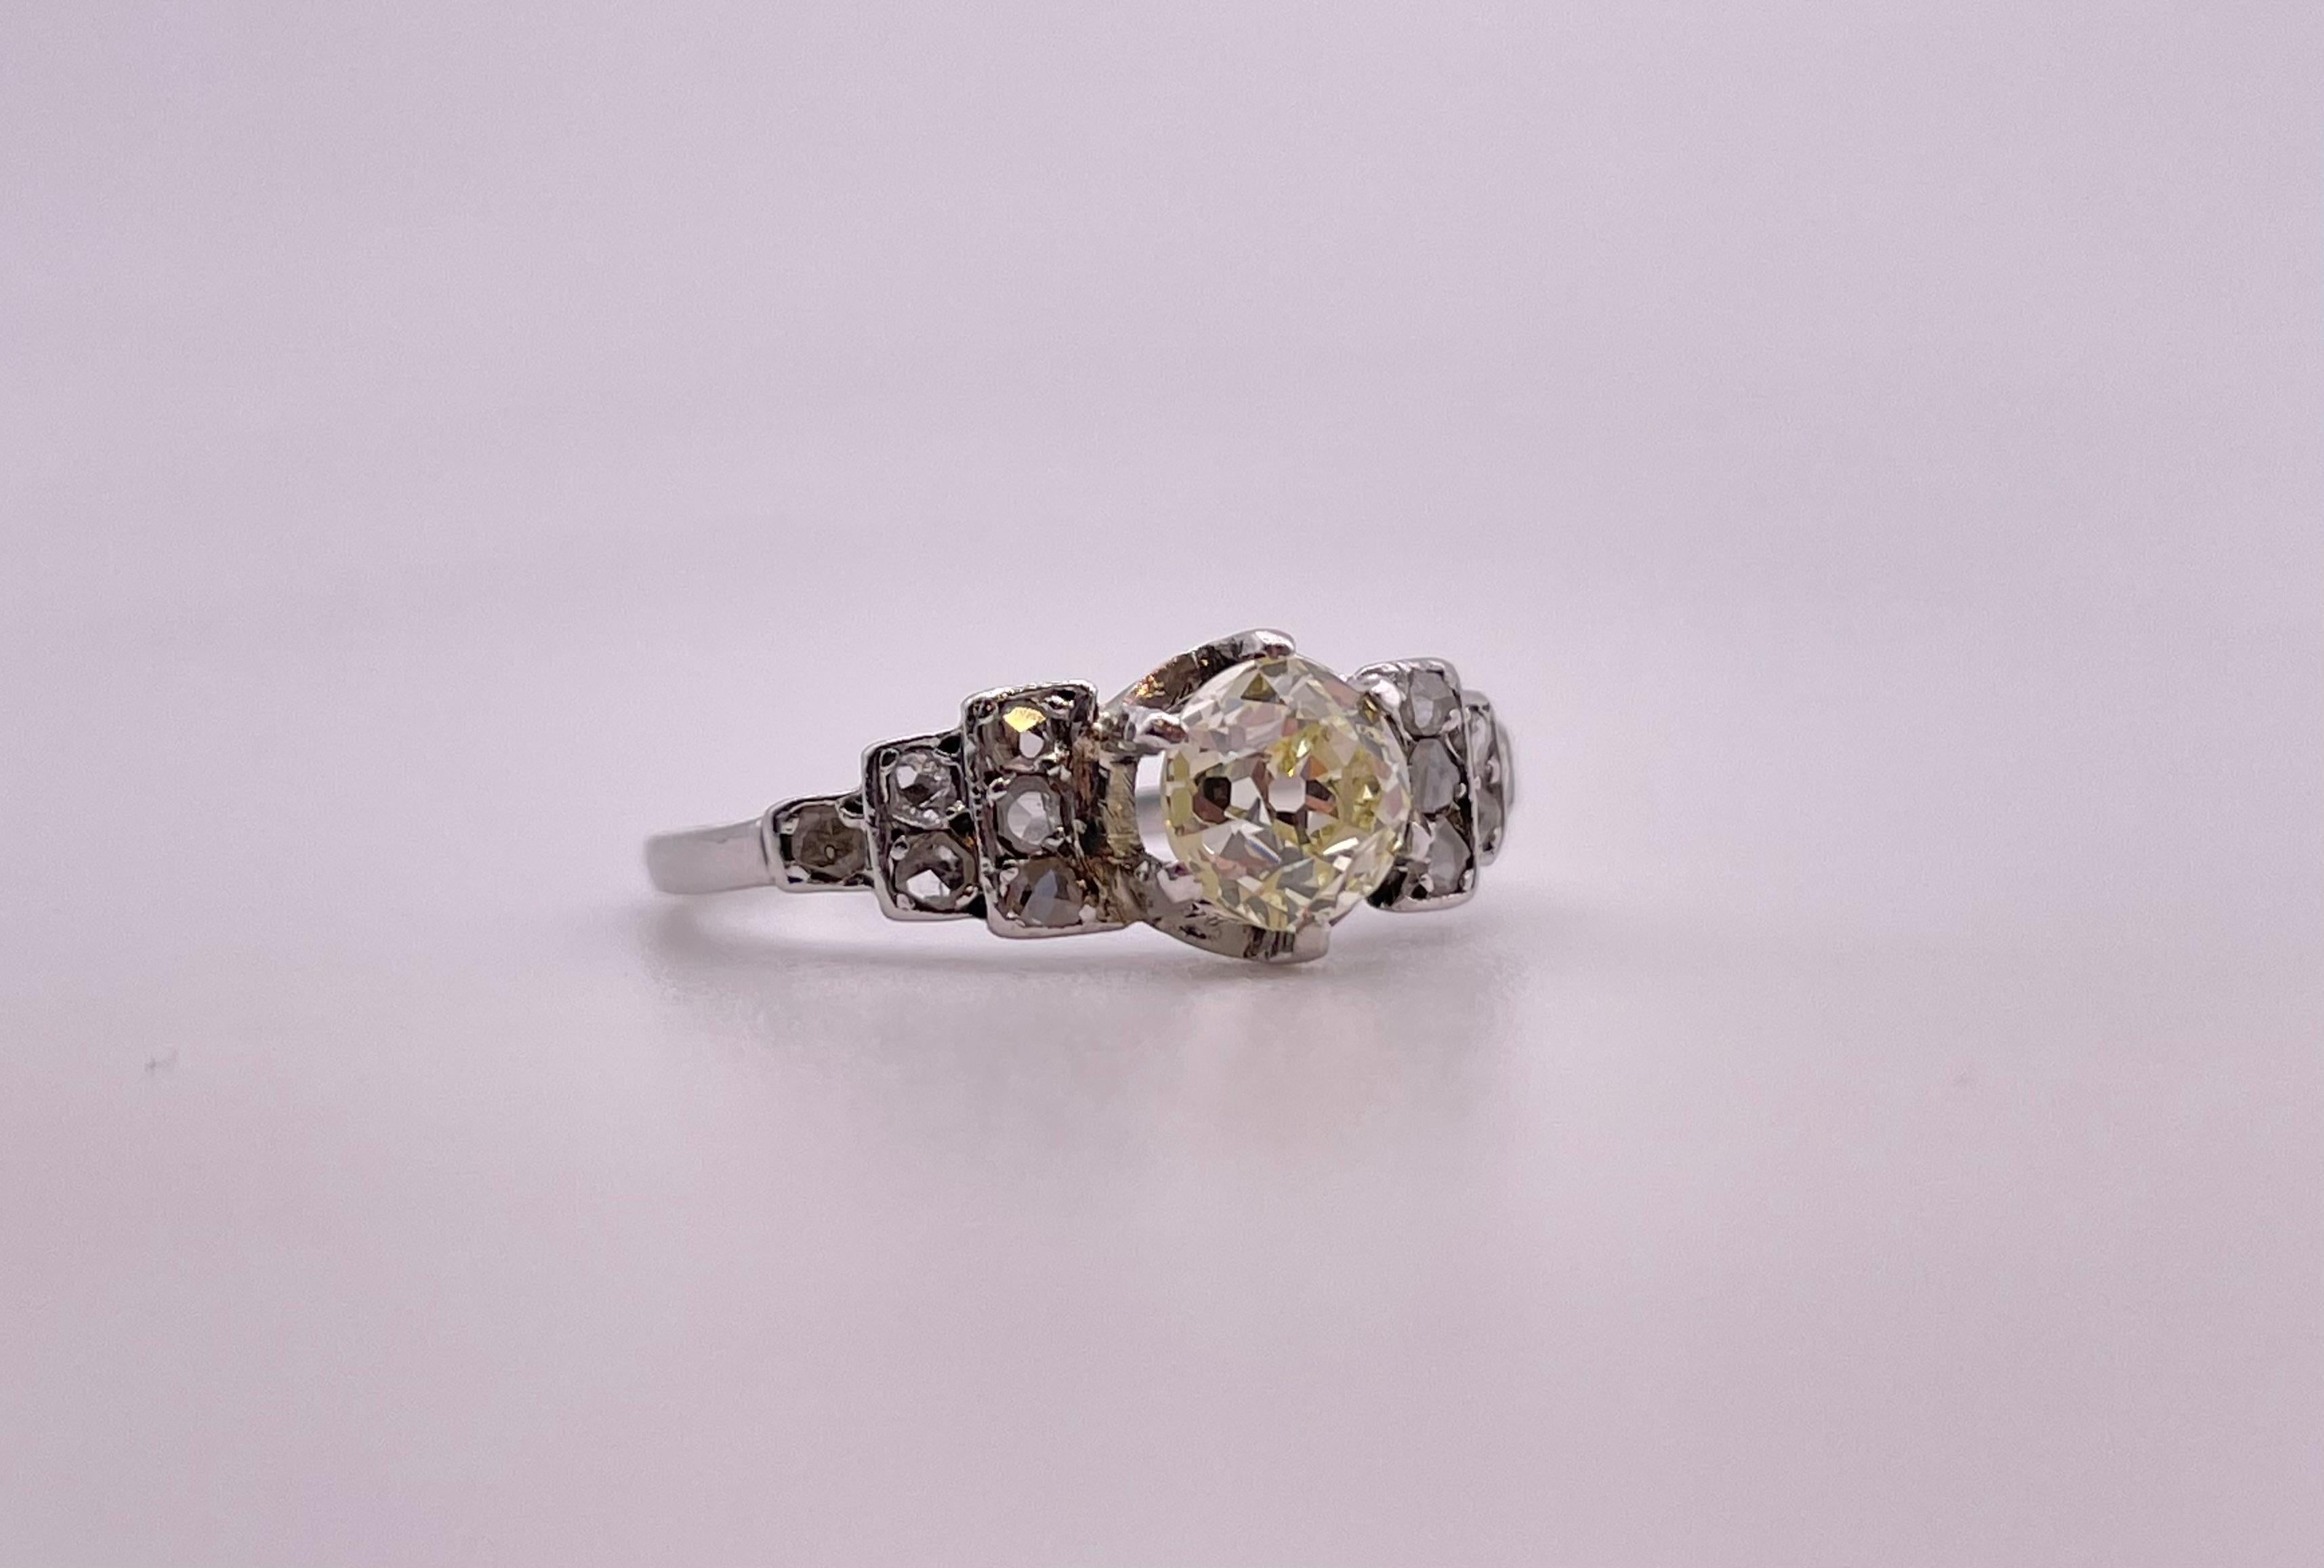 This is a stunning and dramatic Antique Art Deco Old Mine Cut Diamond Ring in White Gold with a gorgeous central 0.90 Carat Old Mine Diamond . 
The central Diamond surrounded by 12 smaller Old Mine Cut Diamond set on the mount . 
color : K
clarity :